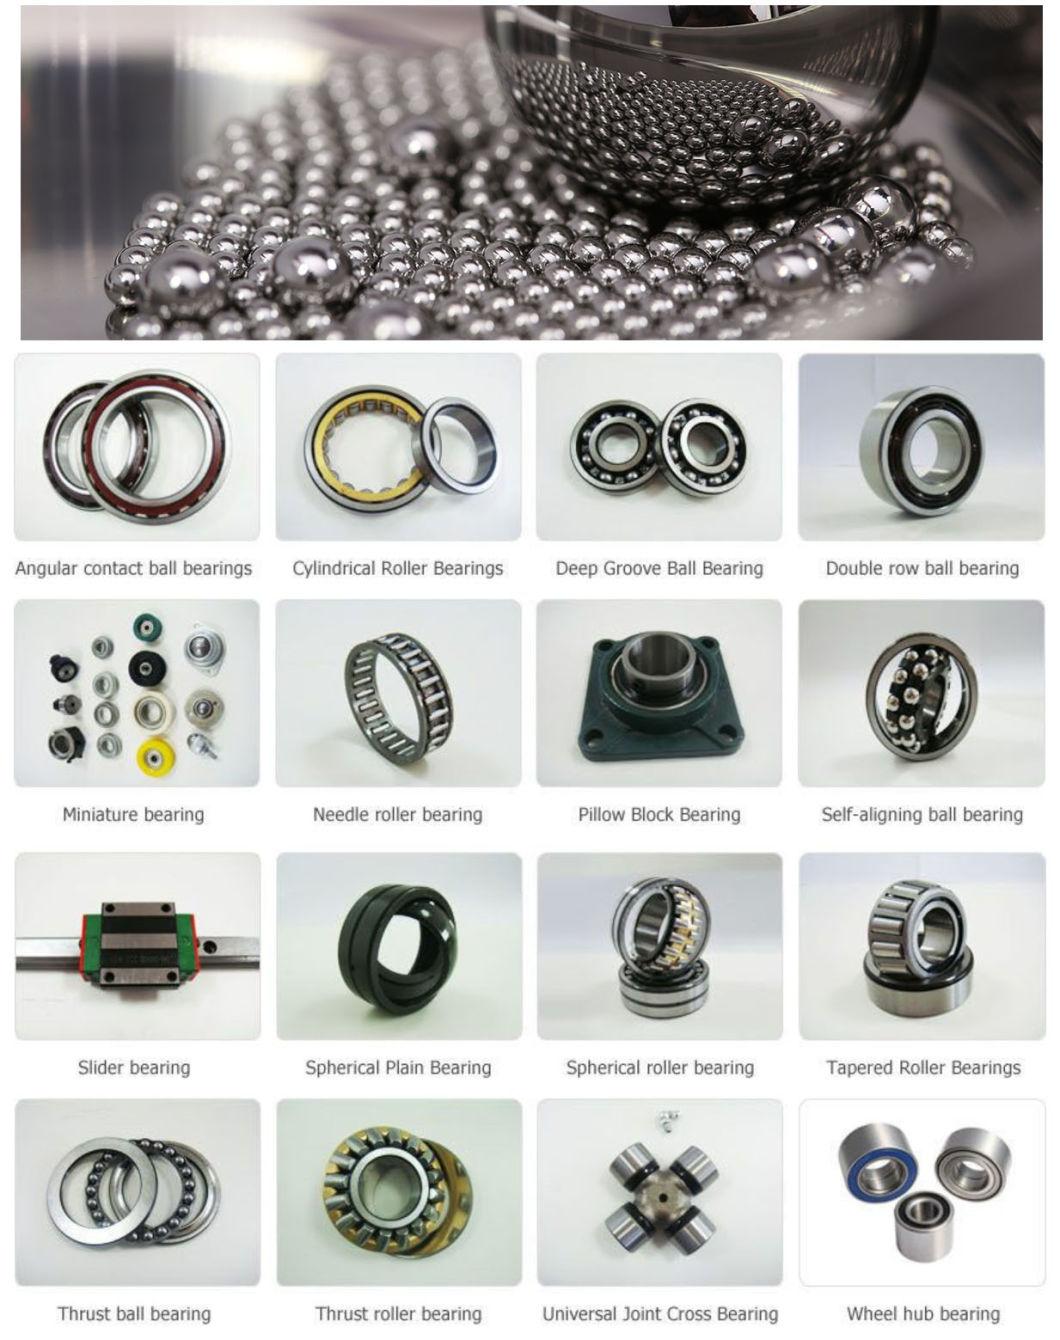 Durability Widely Use High Quality Chrome Steel Pillow Block Bearing